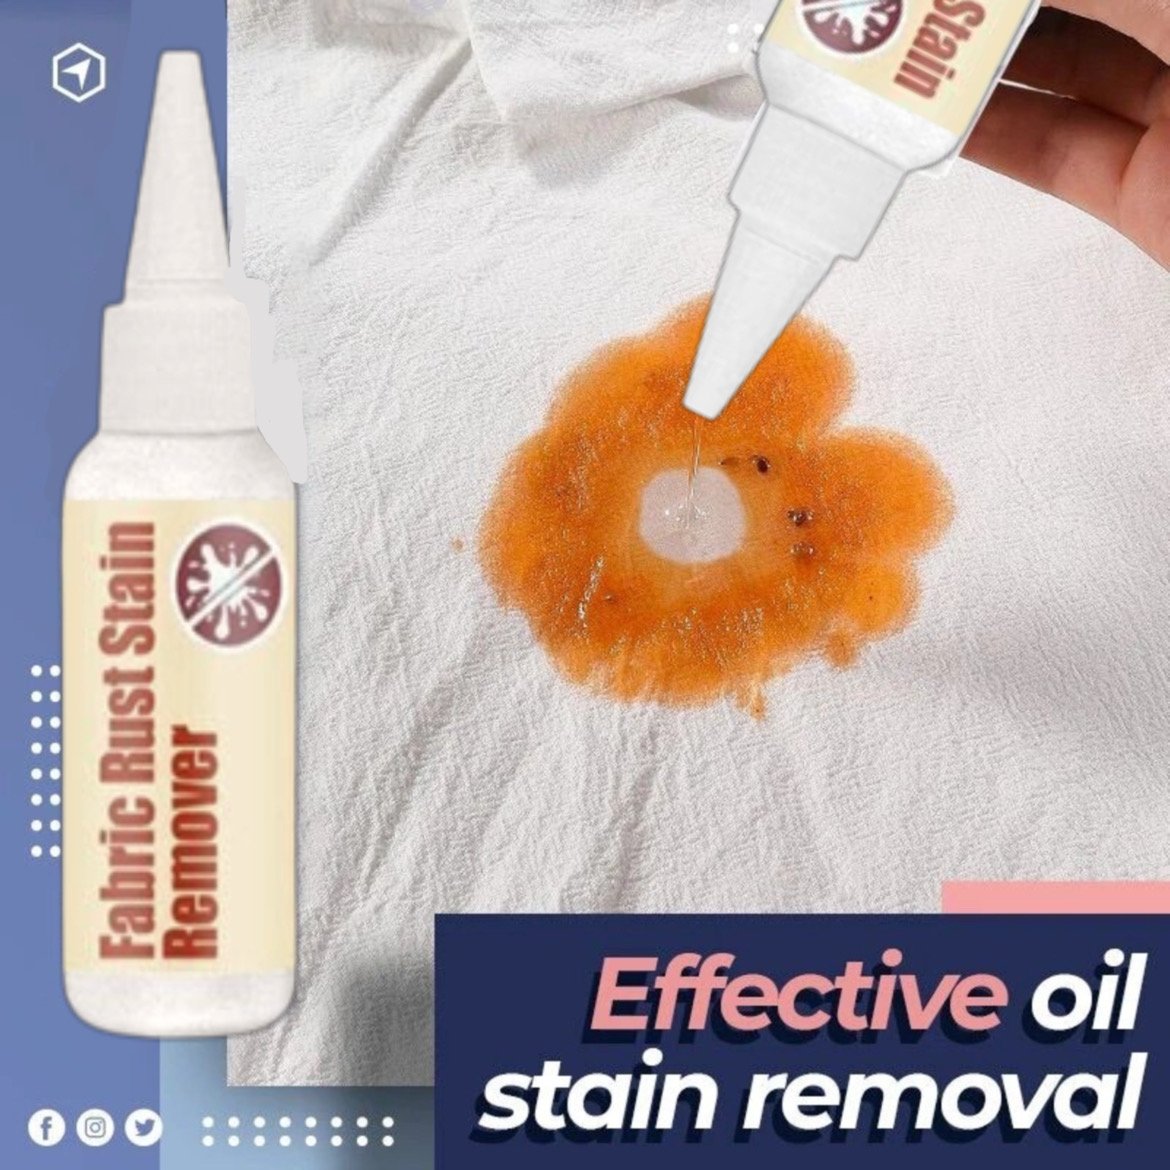 (🔥Last Day Promotion - 48% OFF) Emergency Stain Rescue - Buy 3 Get 2 Free